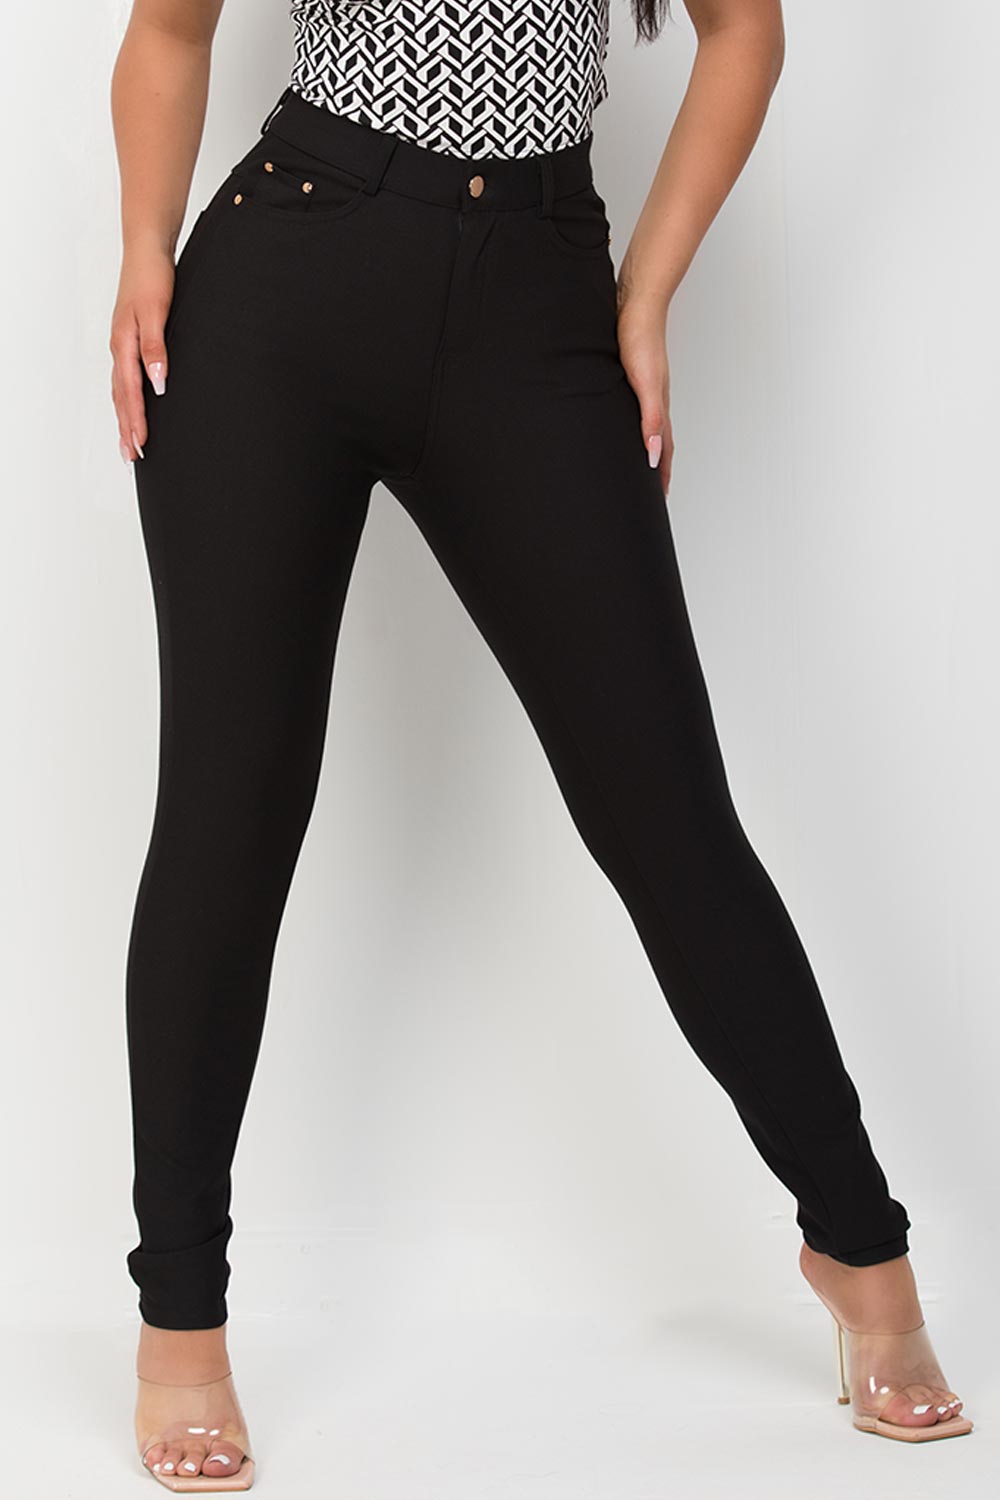 black high waisted skinny trousers jaggings womens